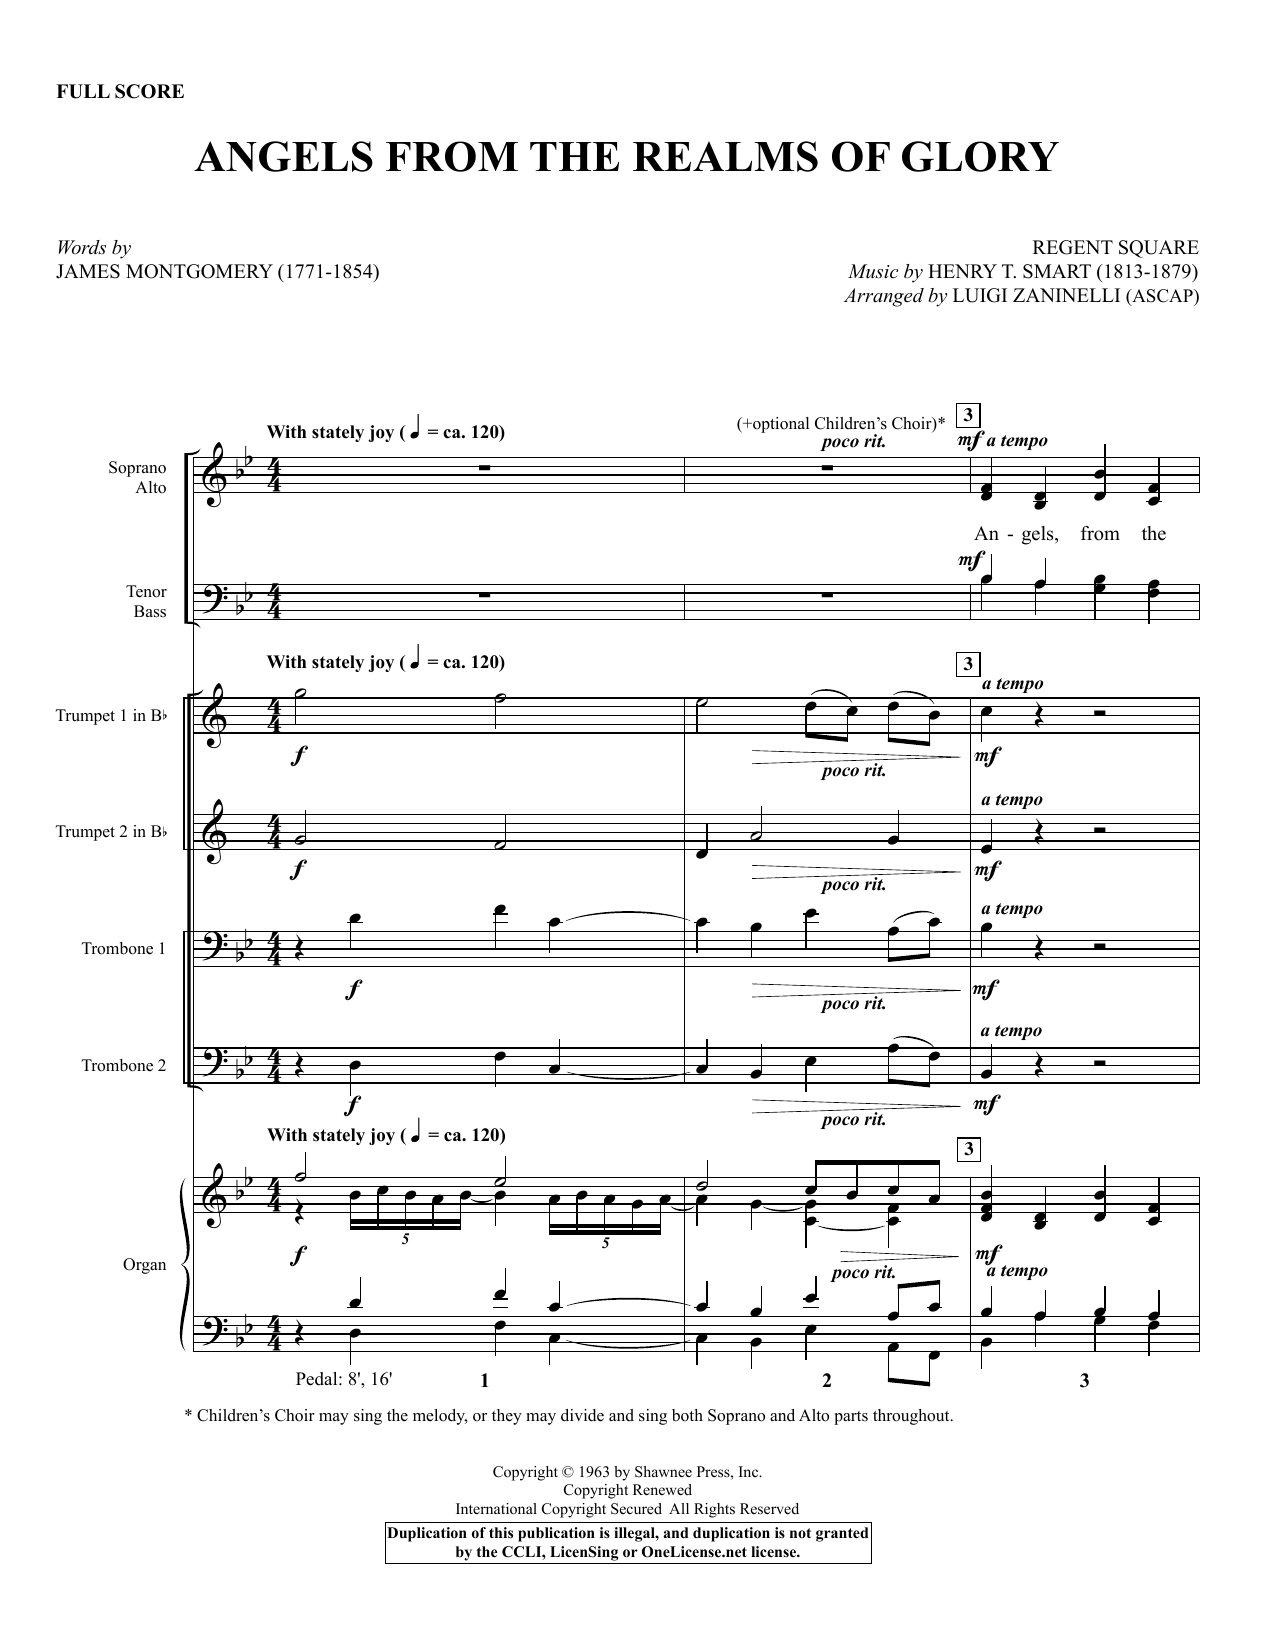 Luigi Zaninelli Angels from the Realms of Glory - Full Score sheet music notes and chords. Download Printable PDF.